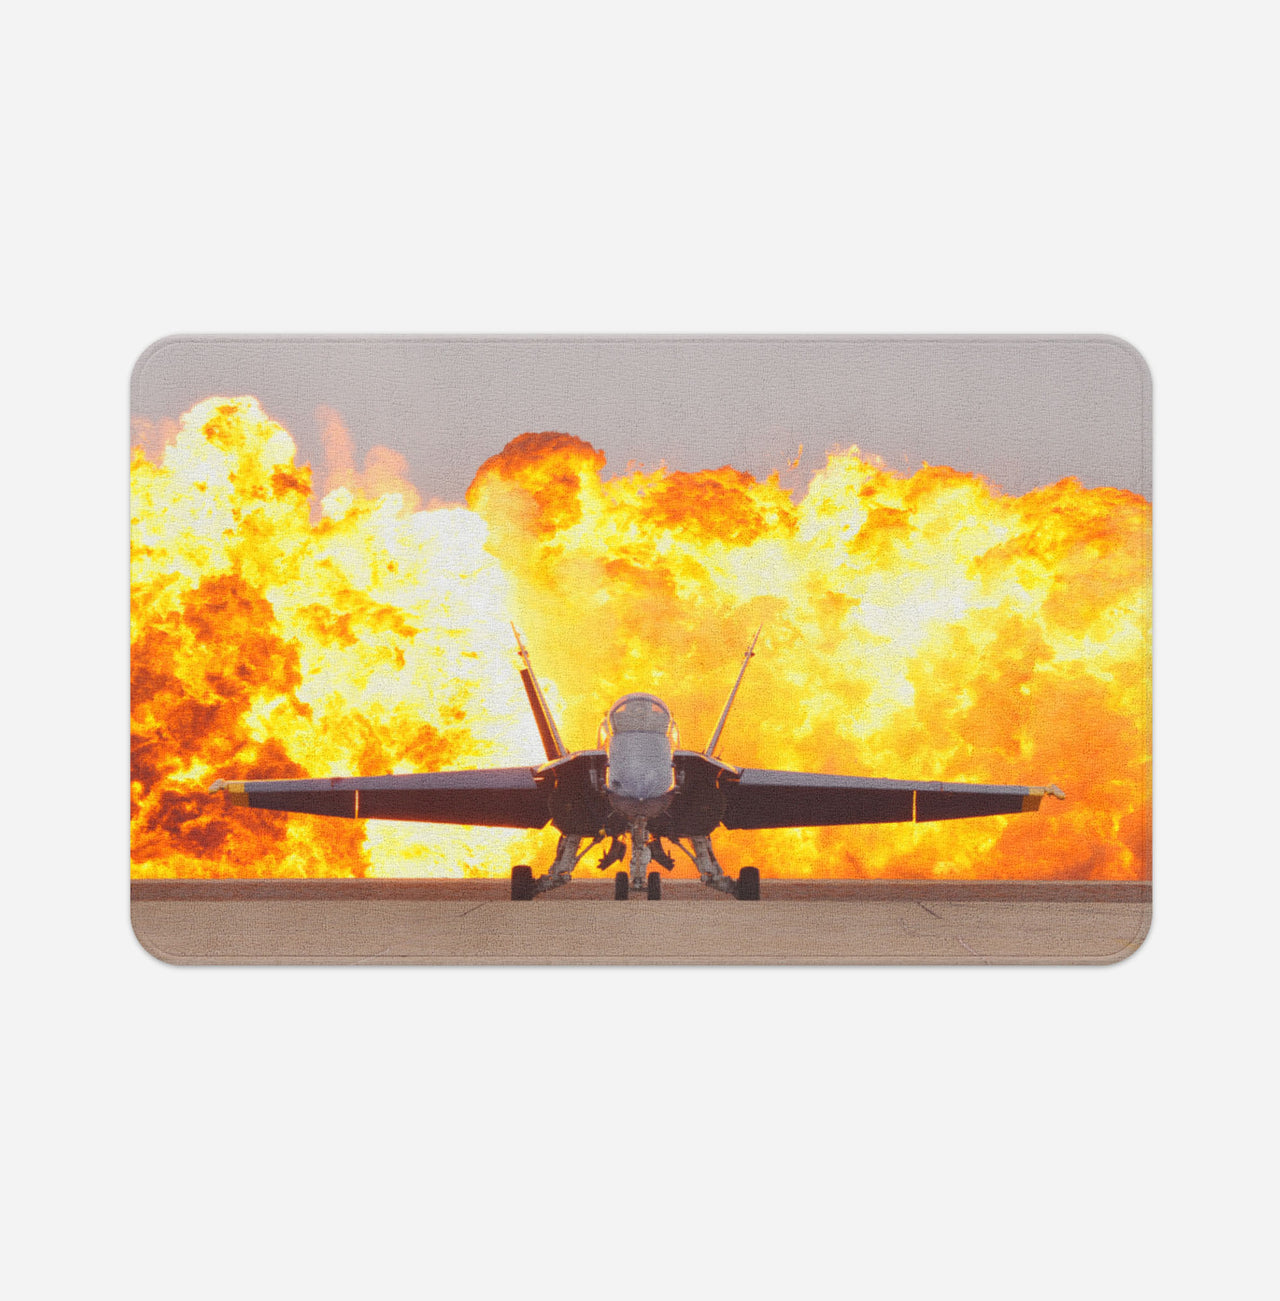 Face to Face with Air Force Jet & Flames Designed Bath Mats